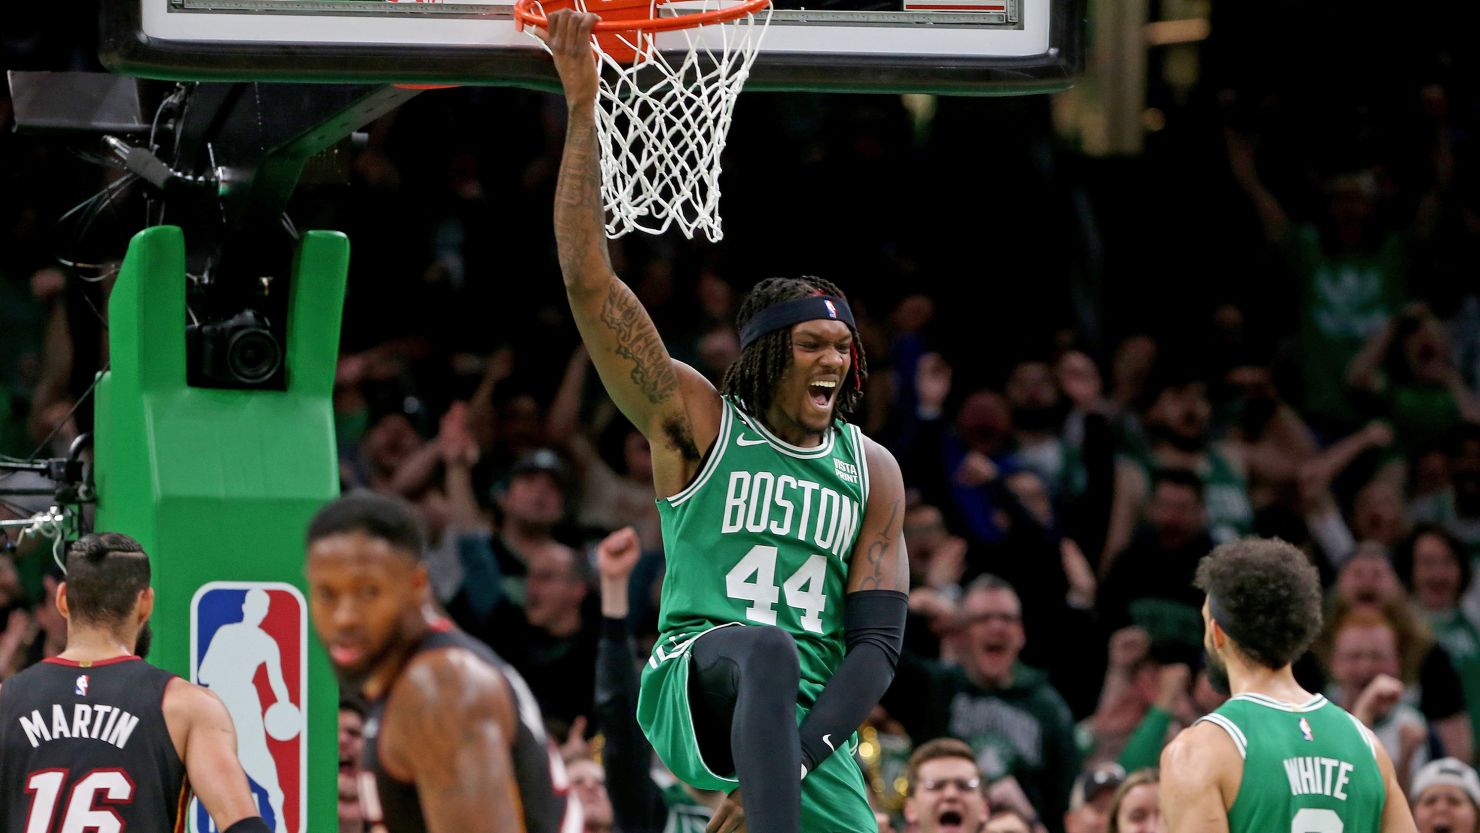 The Boston Celtics have kept their playoff dreams alive with a win.